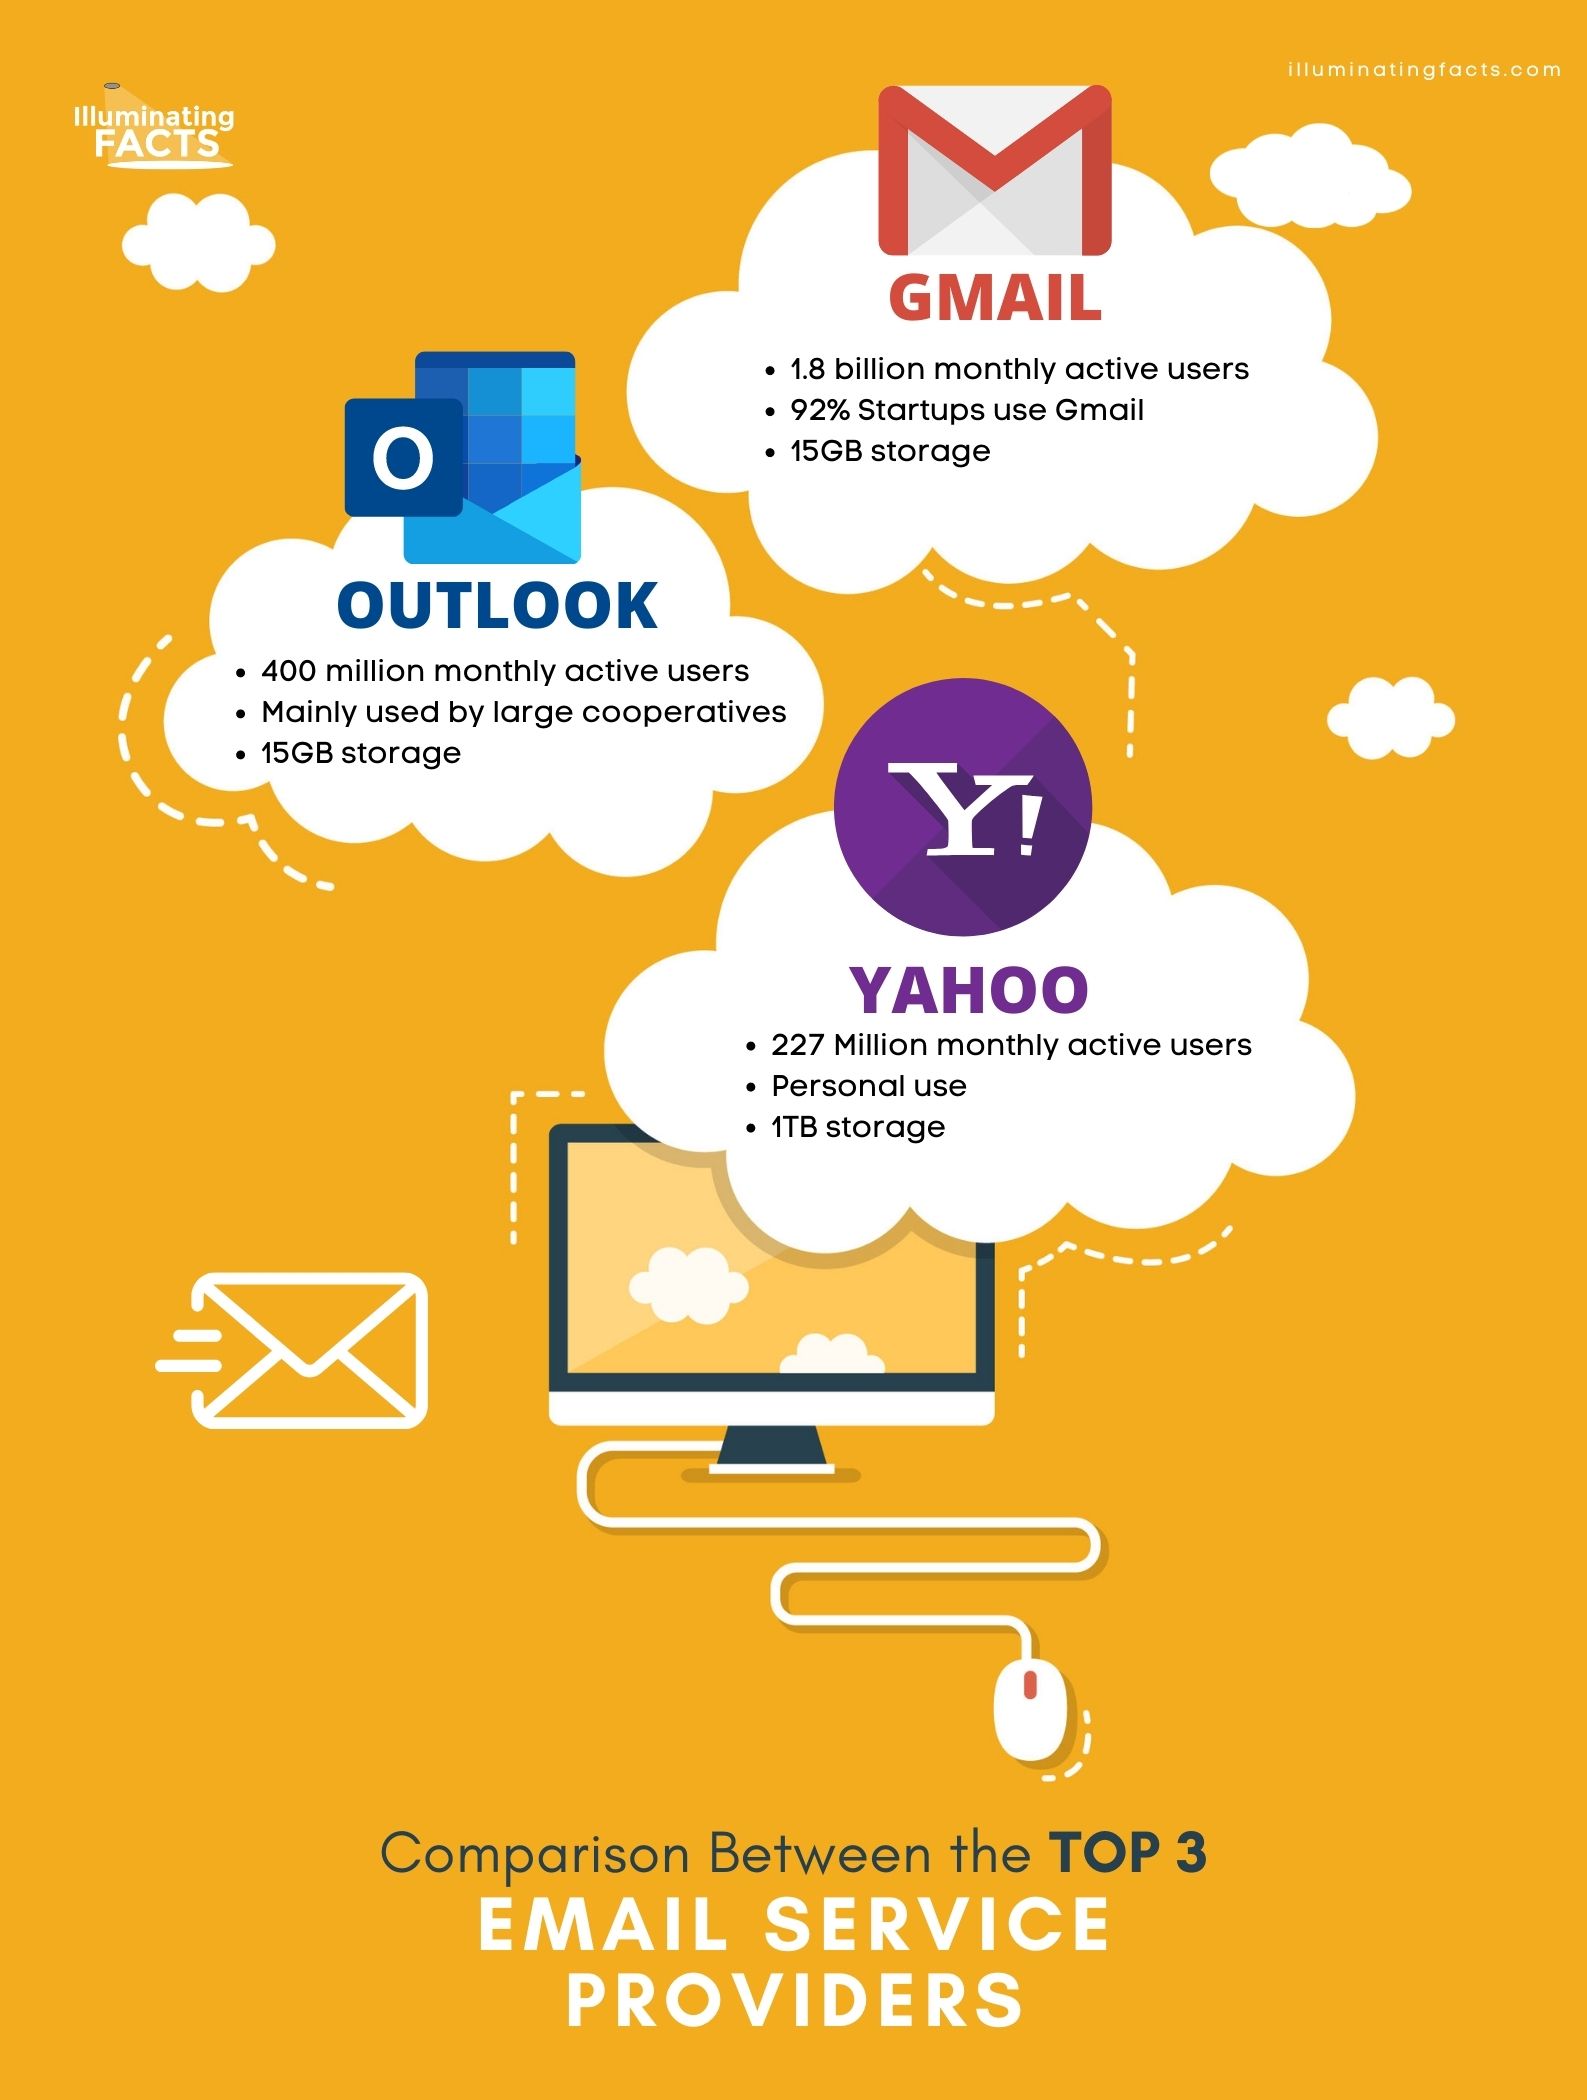 Comparison Between the Top 3 Email Service Providers